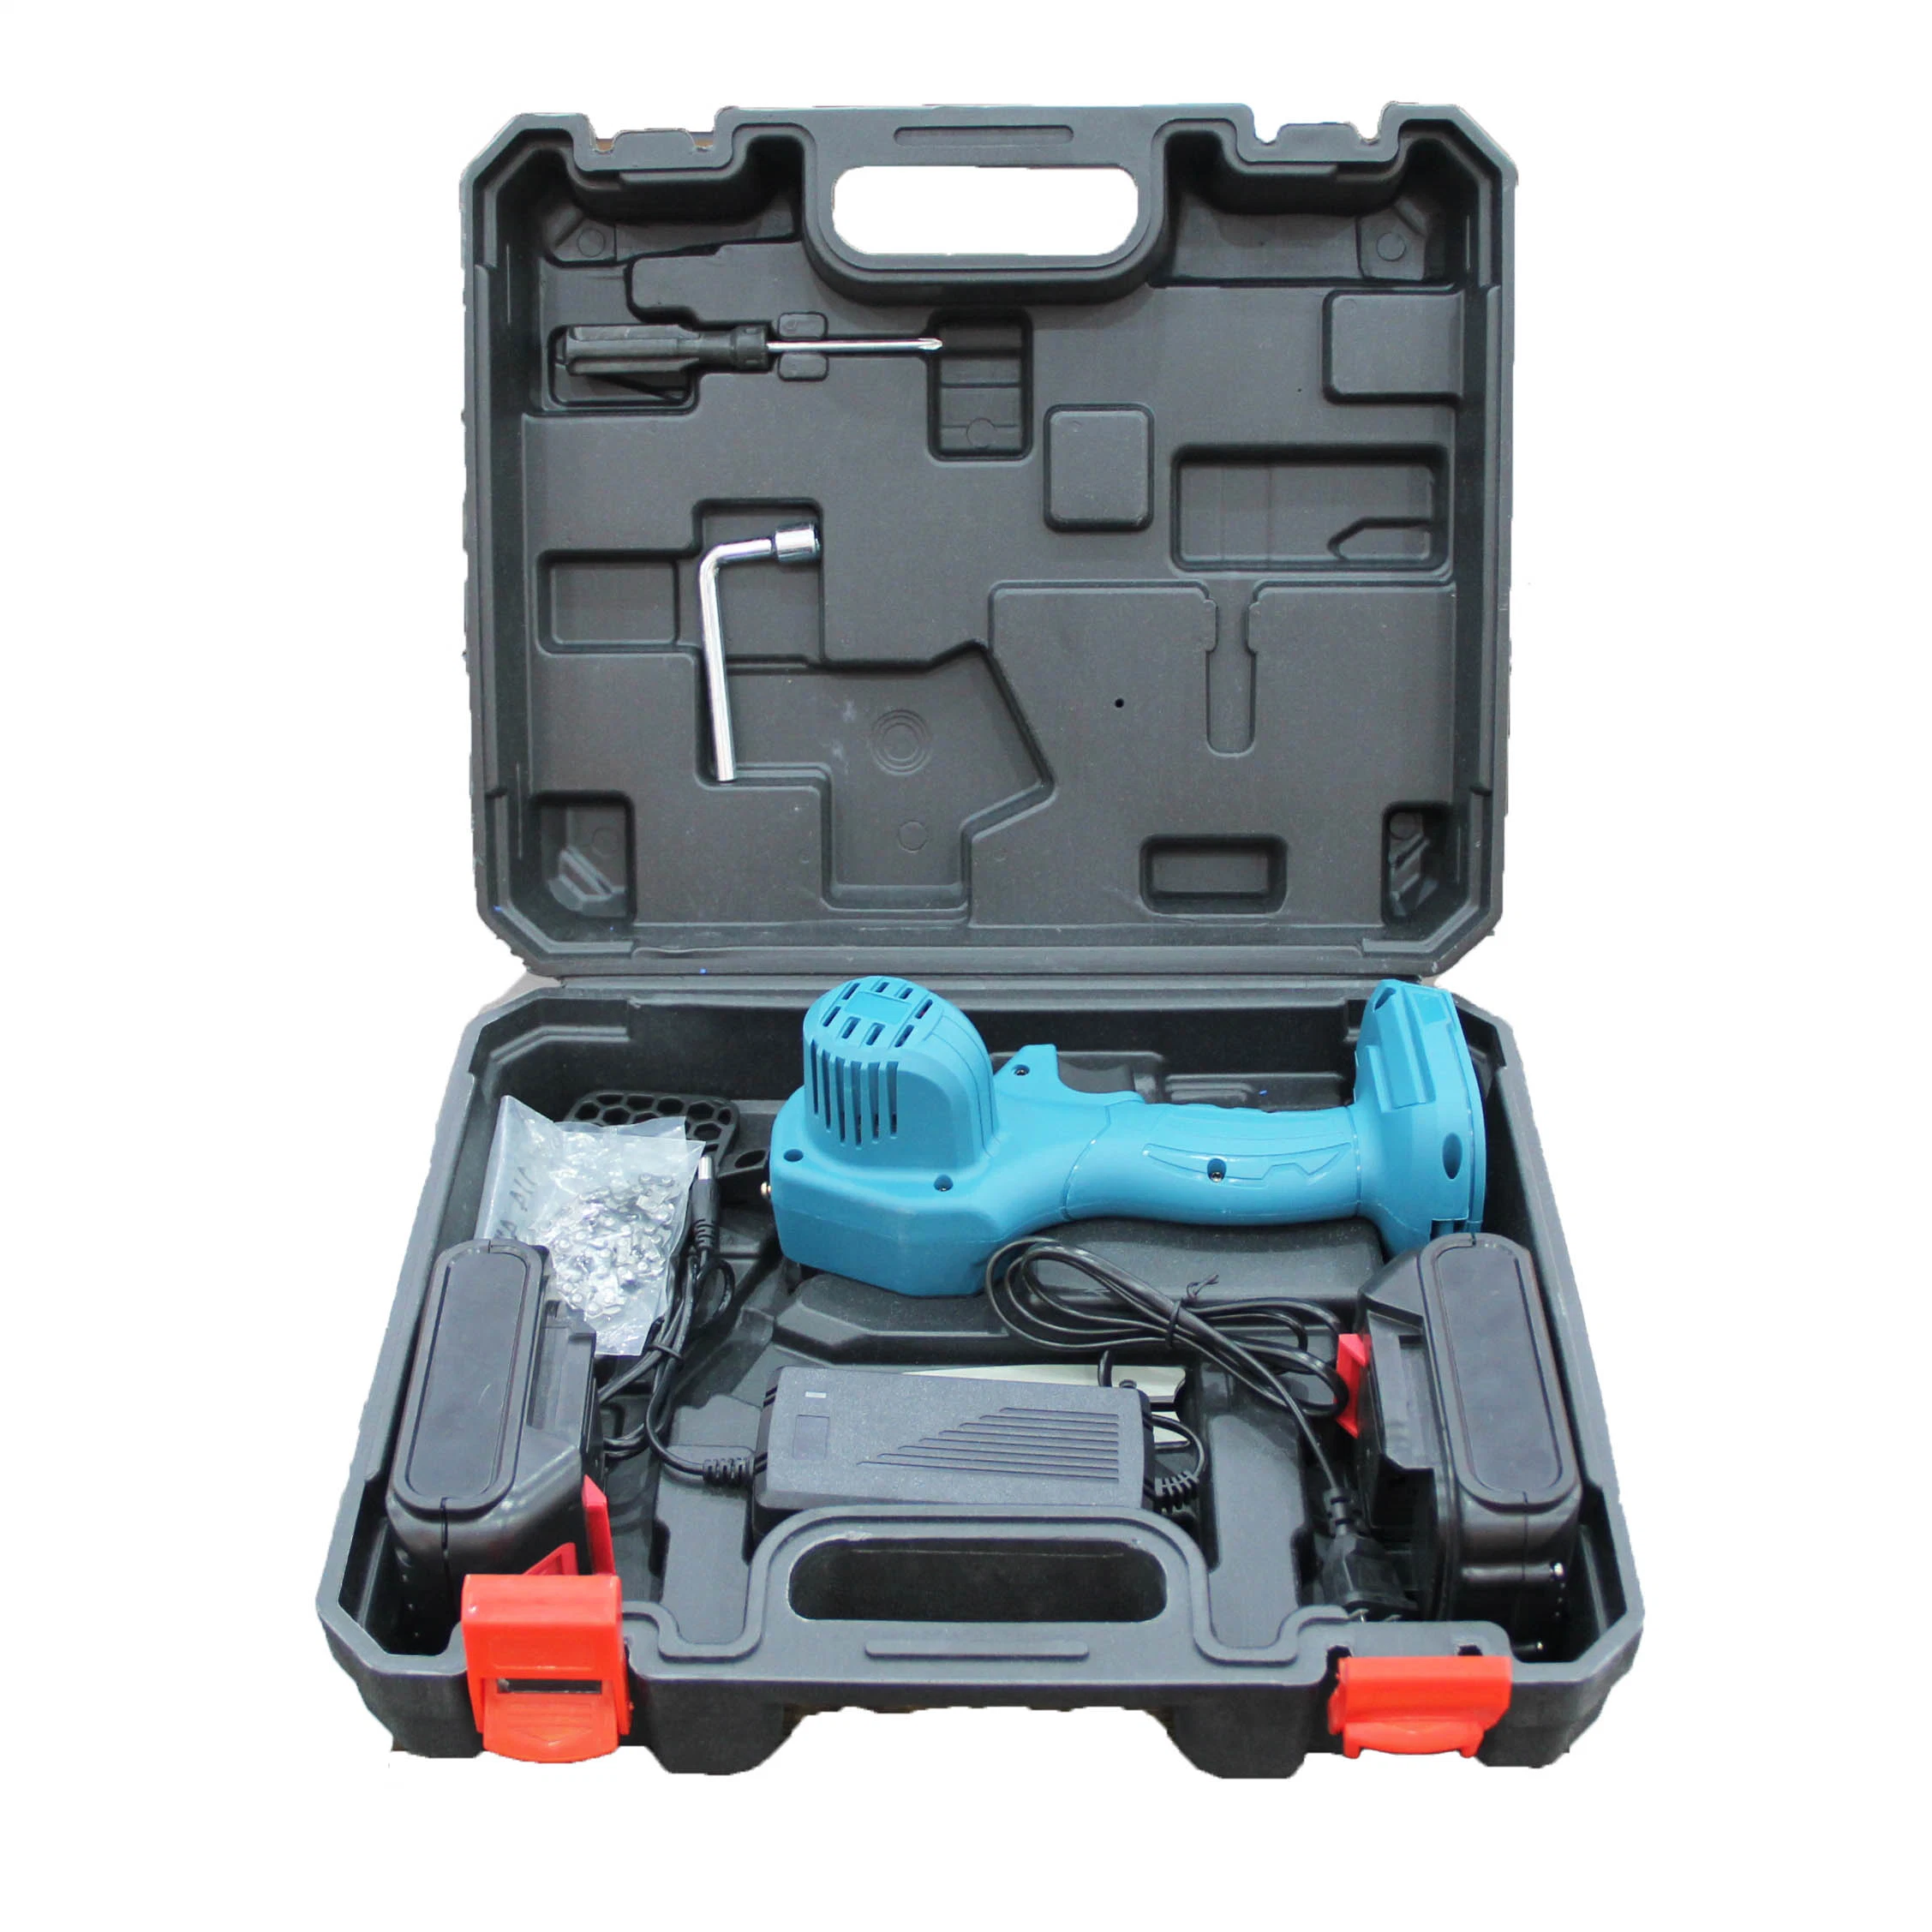 Electric Saw Factory Outlet 800W Household Chain Saw Tool Set Power Tools Electric Tools